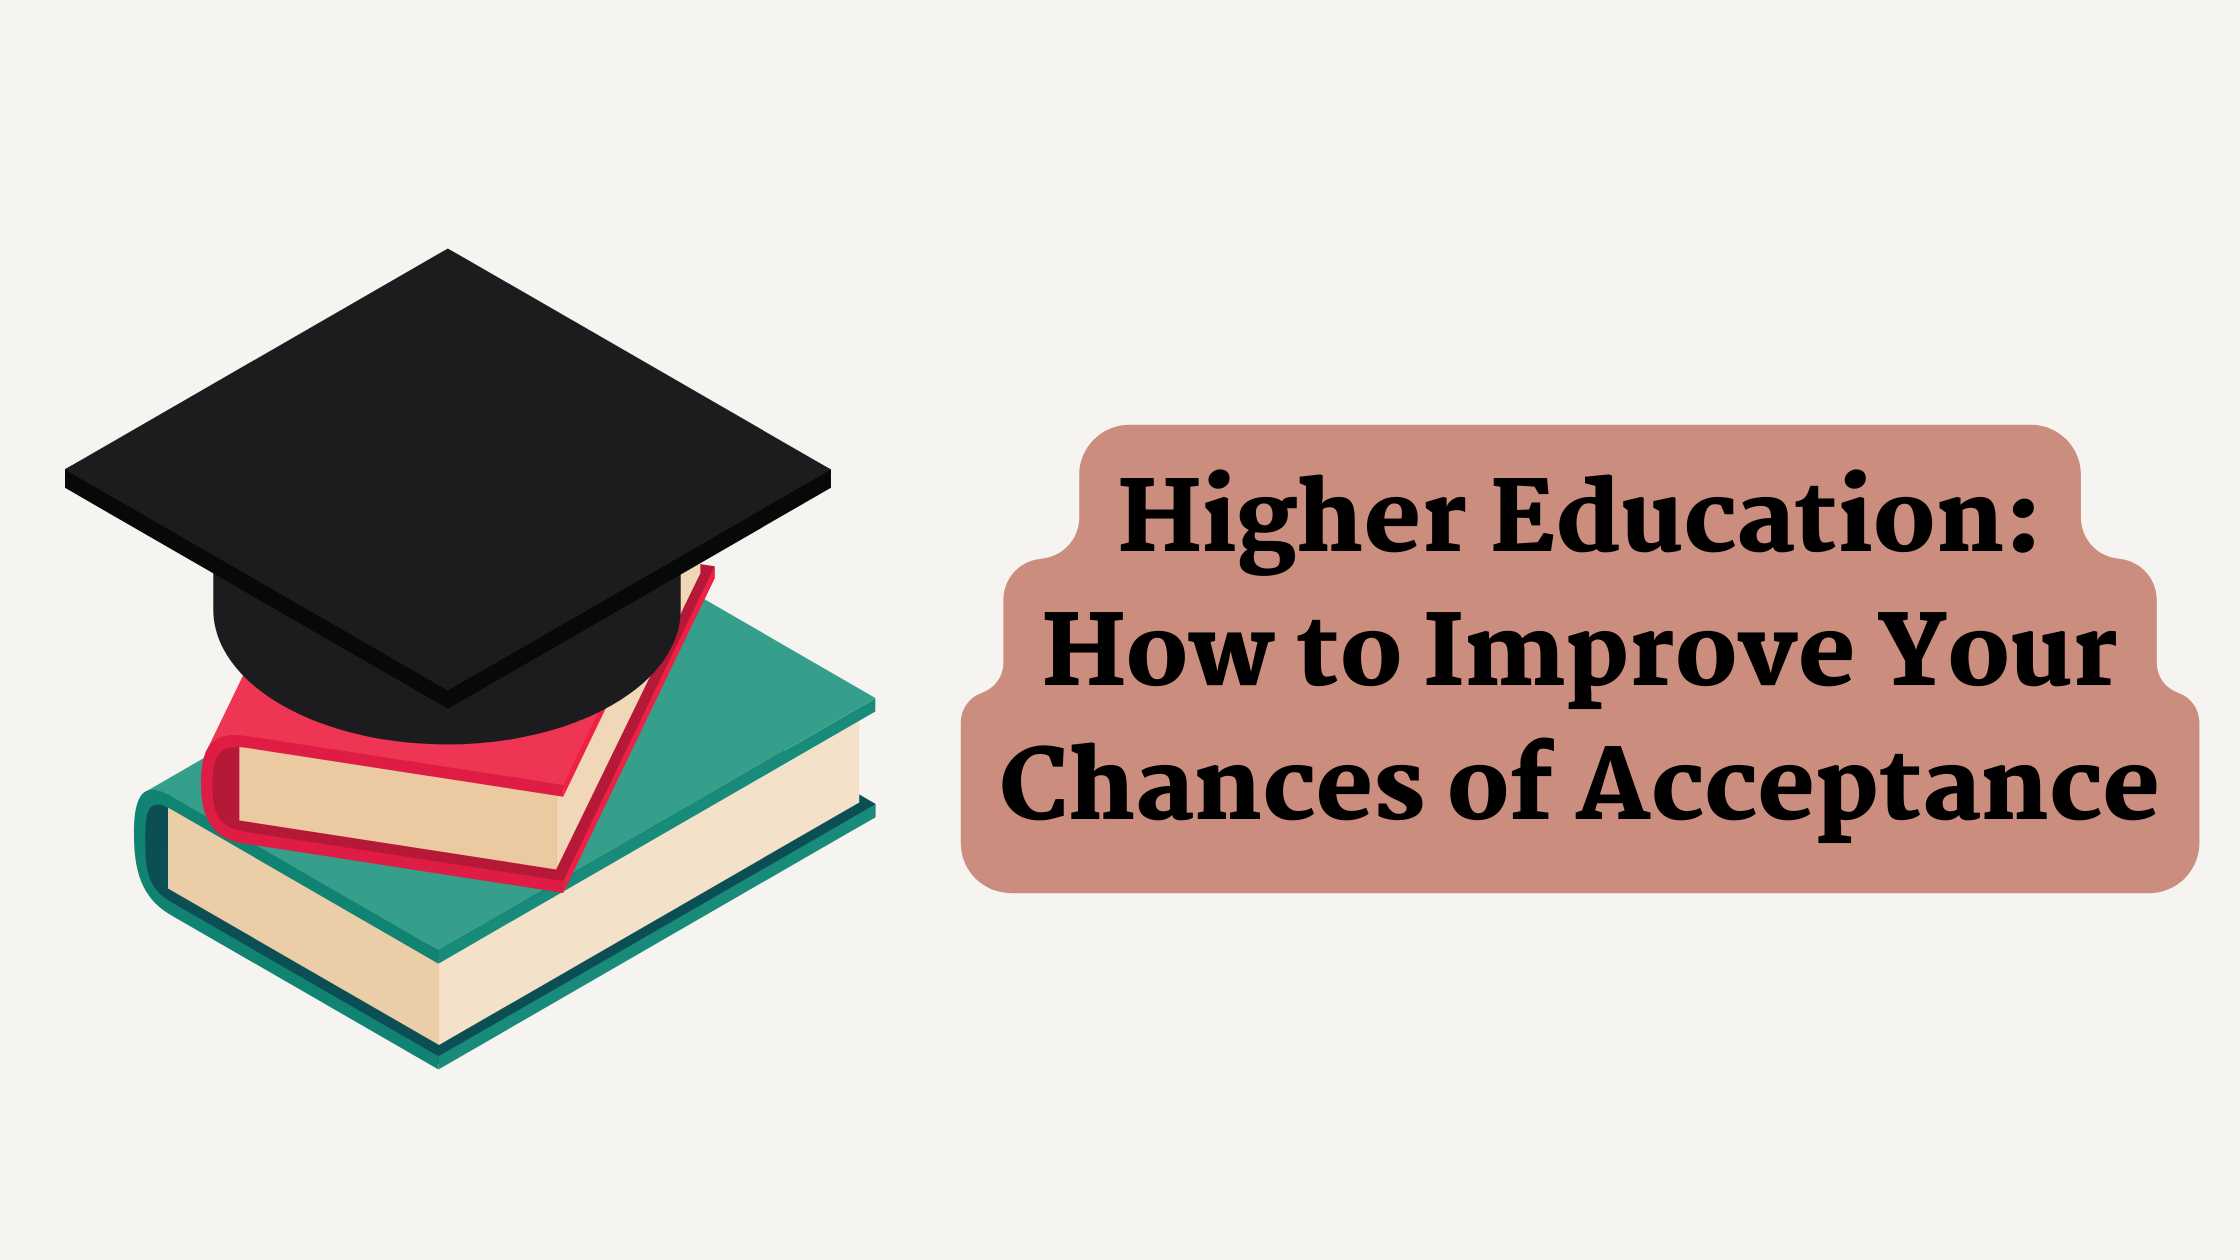 Higher Education: How to Improve Your Chances of Acceptance